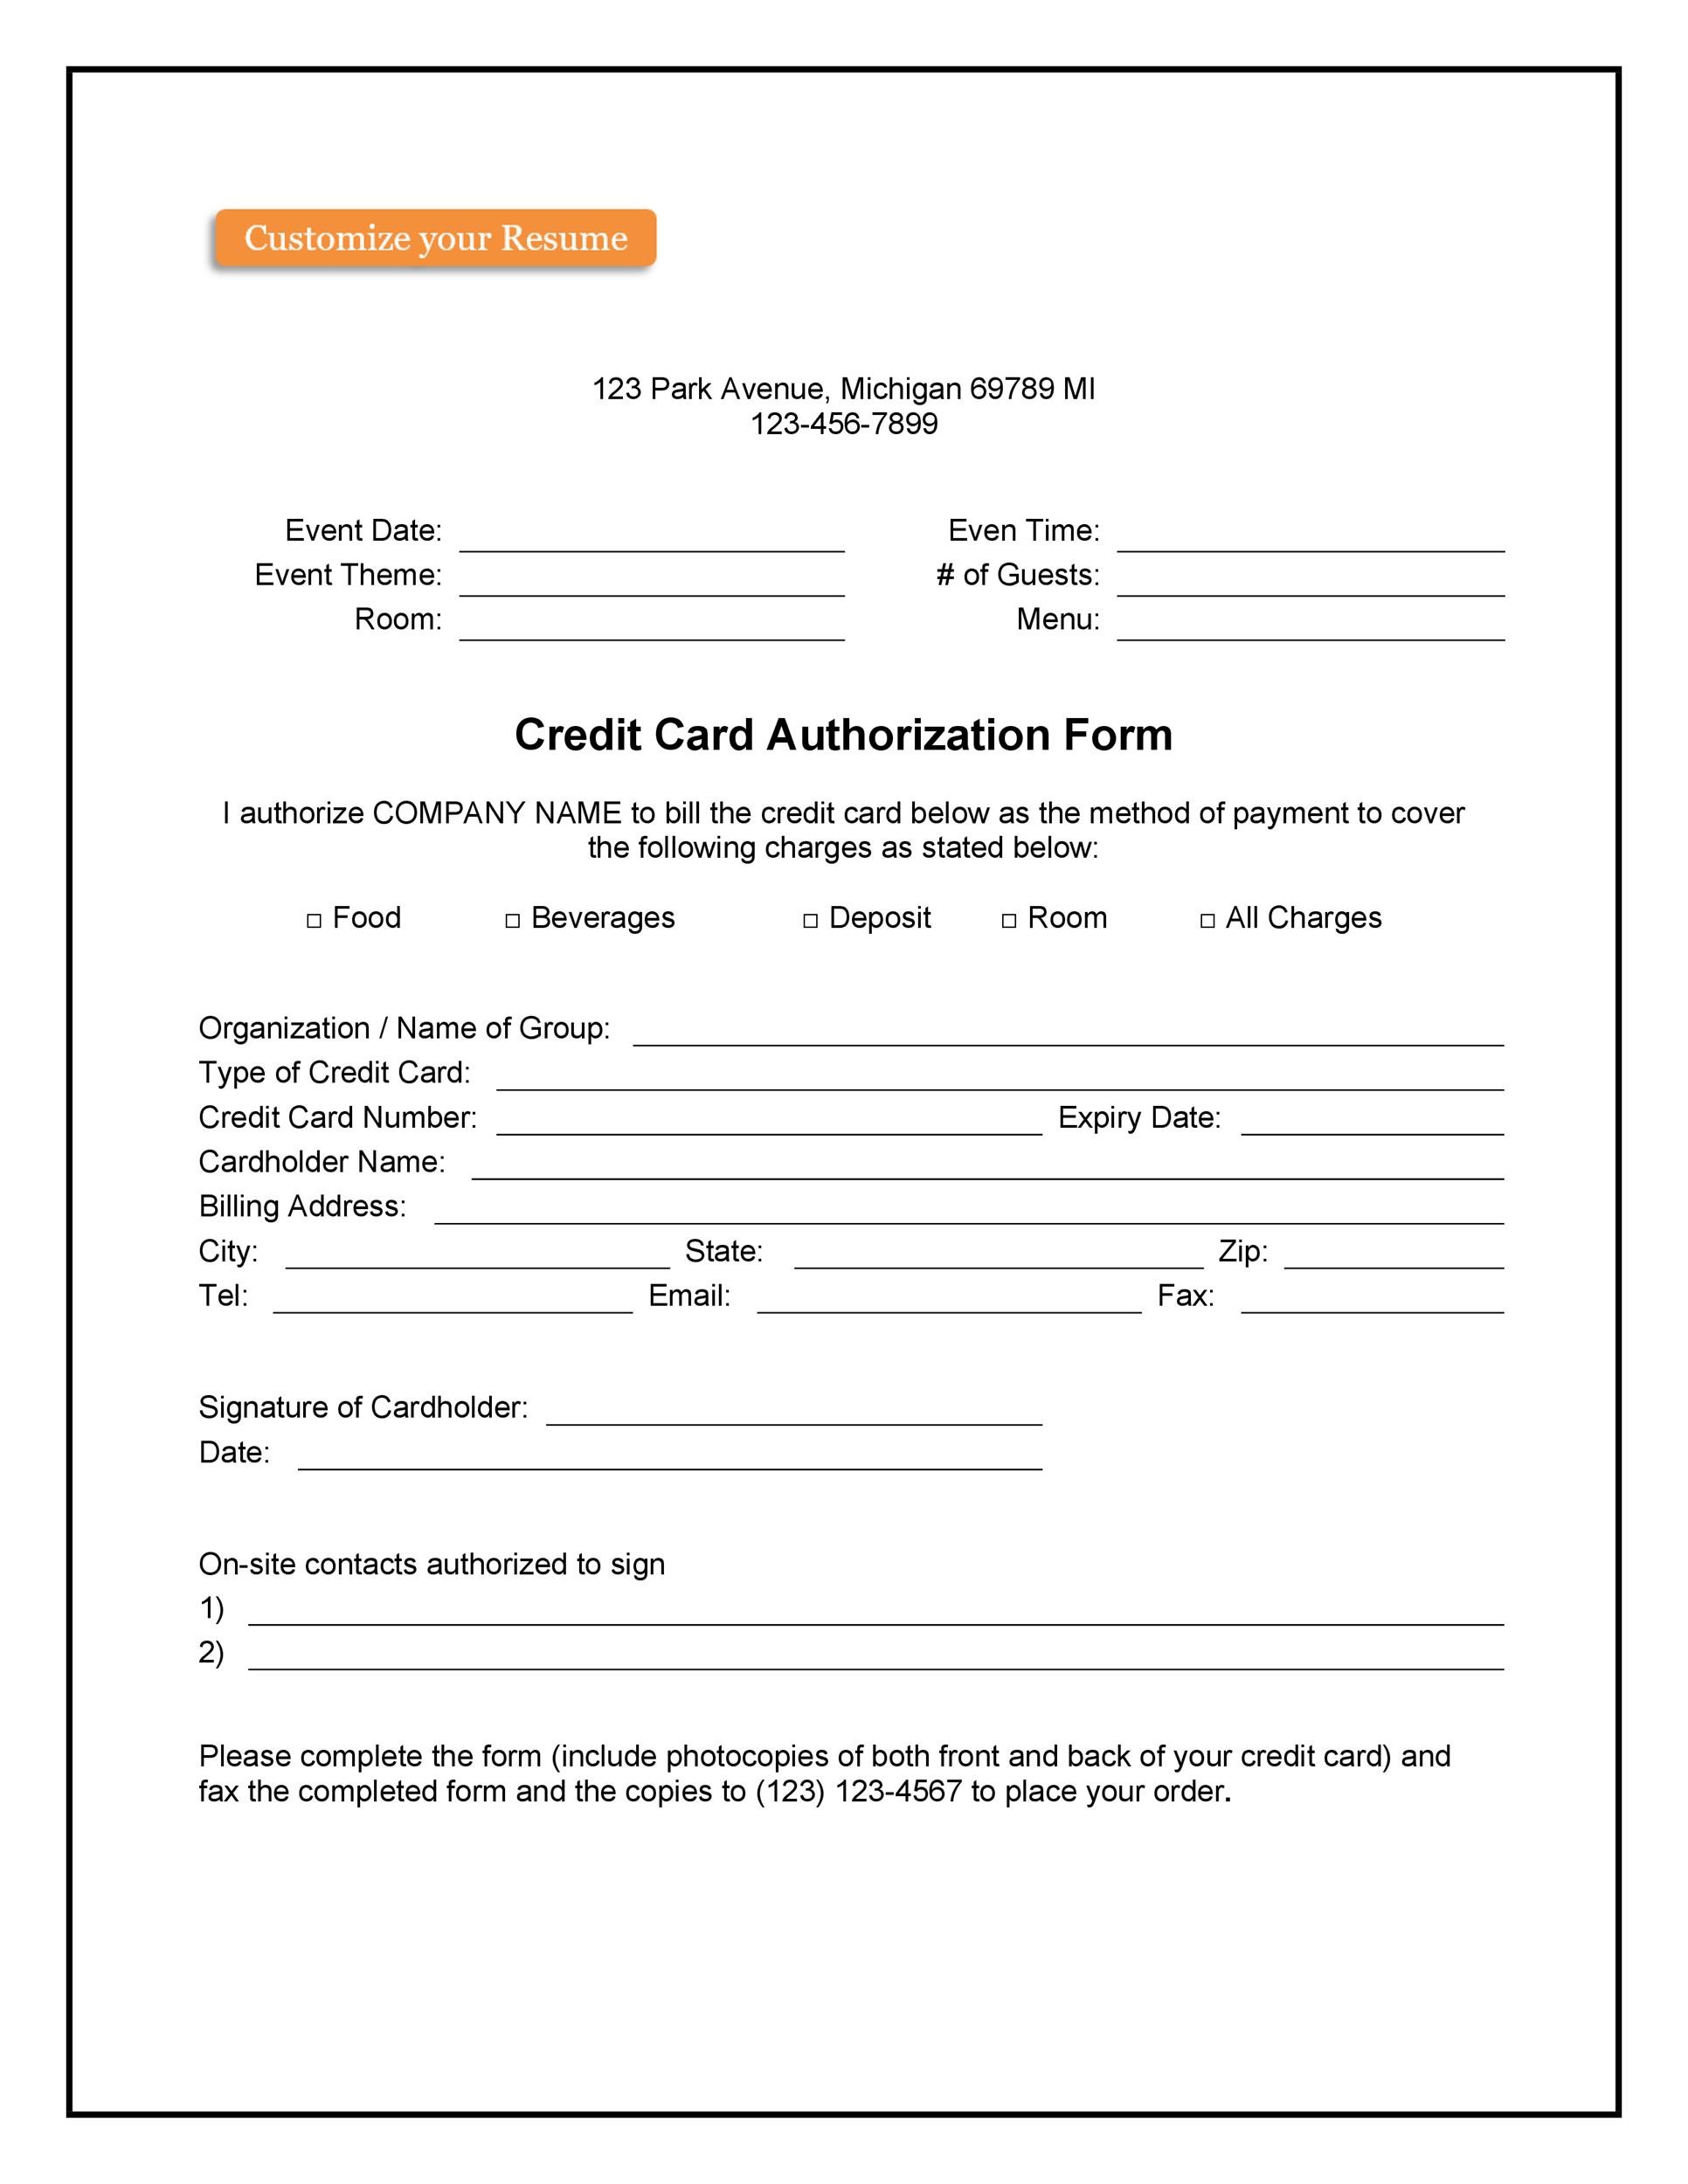 41 Credit Card Authorization Forms Templates Ready To Use 5462